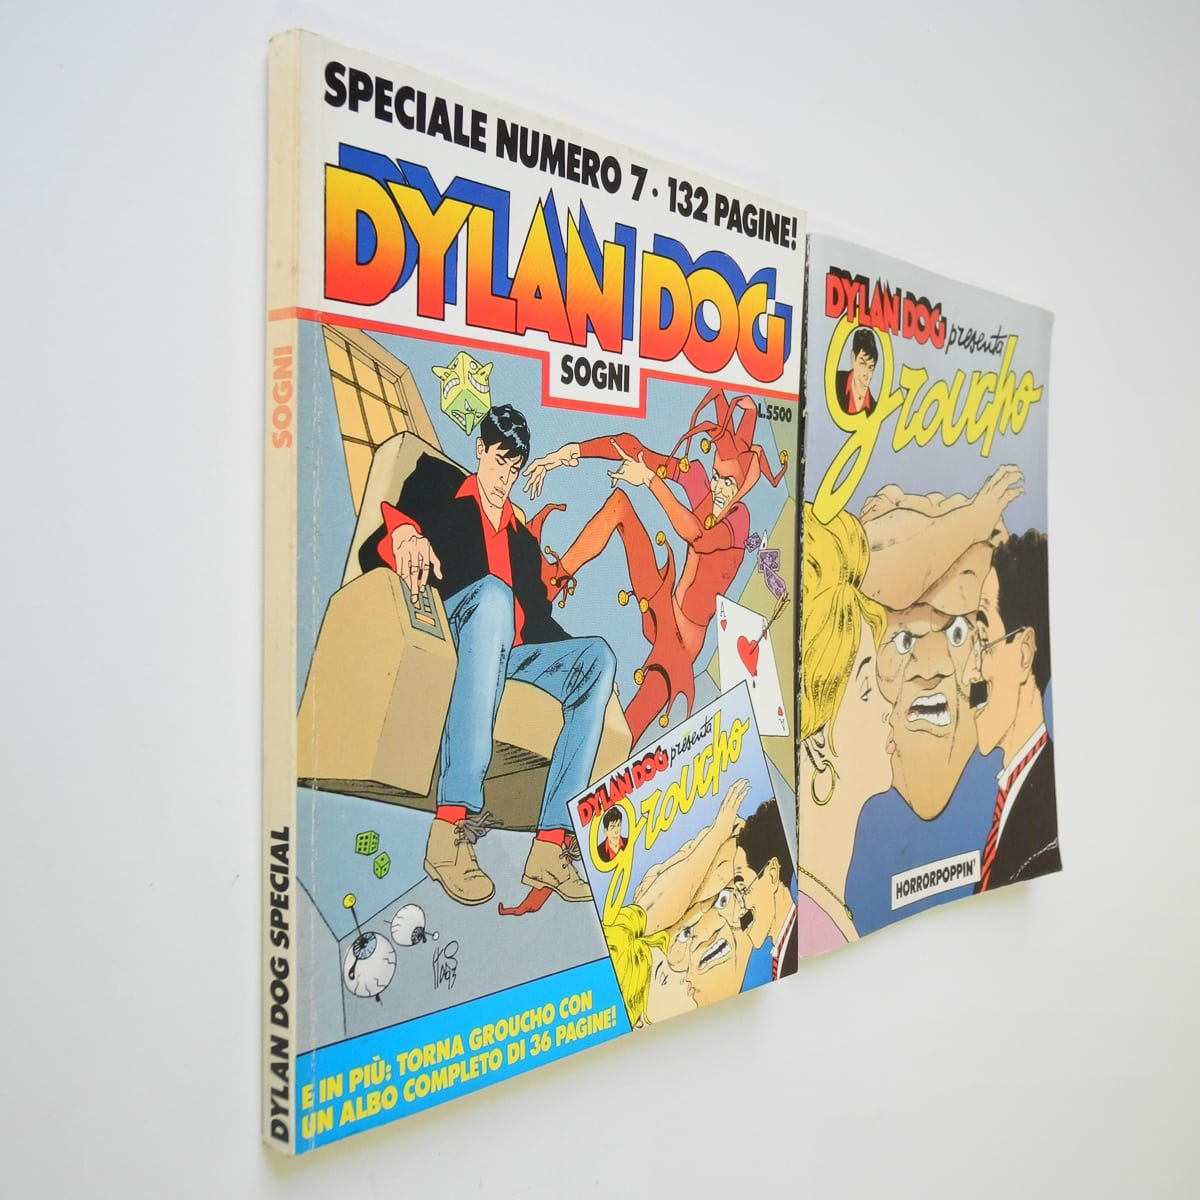 Dylan Dog Speciale n. 7 con Albetto